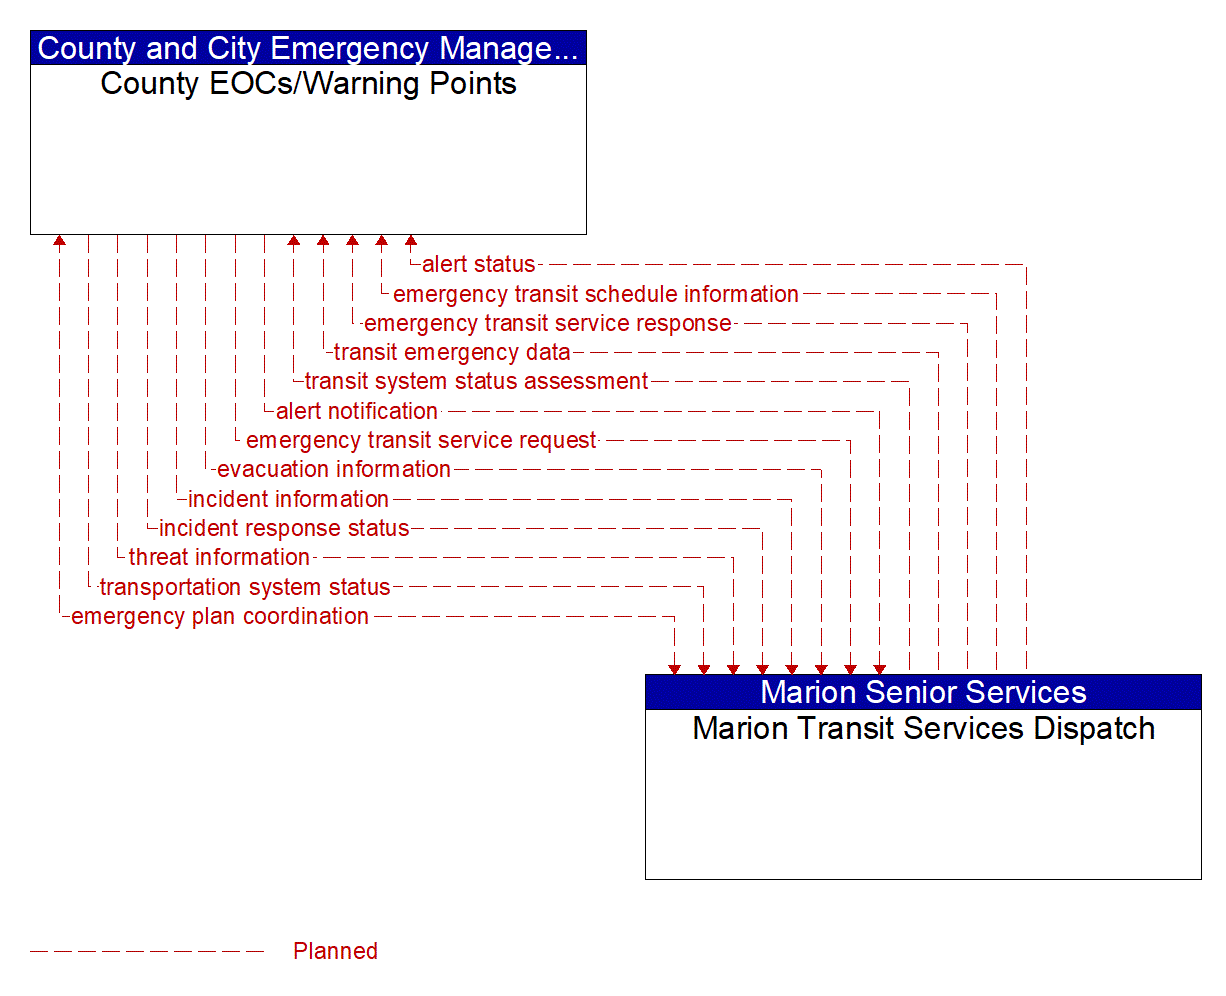 Architecture Flow Diagram: Marion Transit Services Dispatch <--> County EOCs/Warning Points